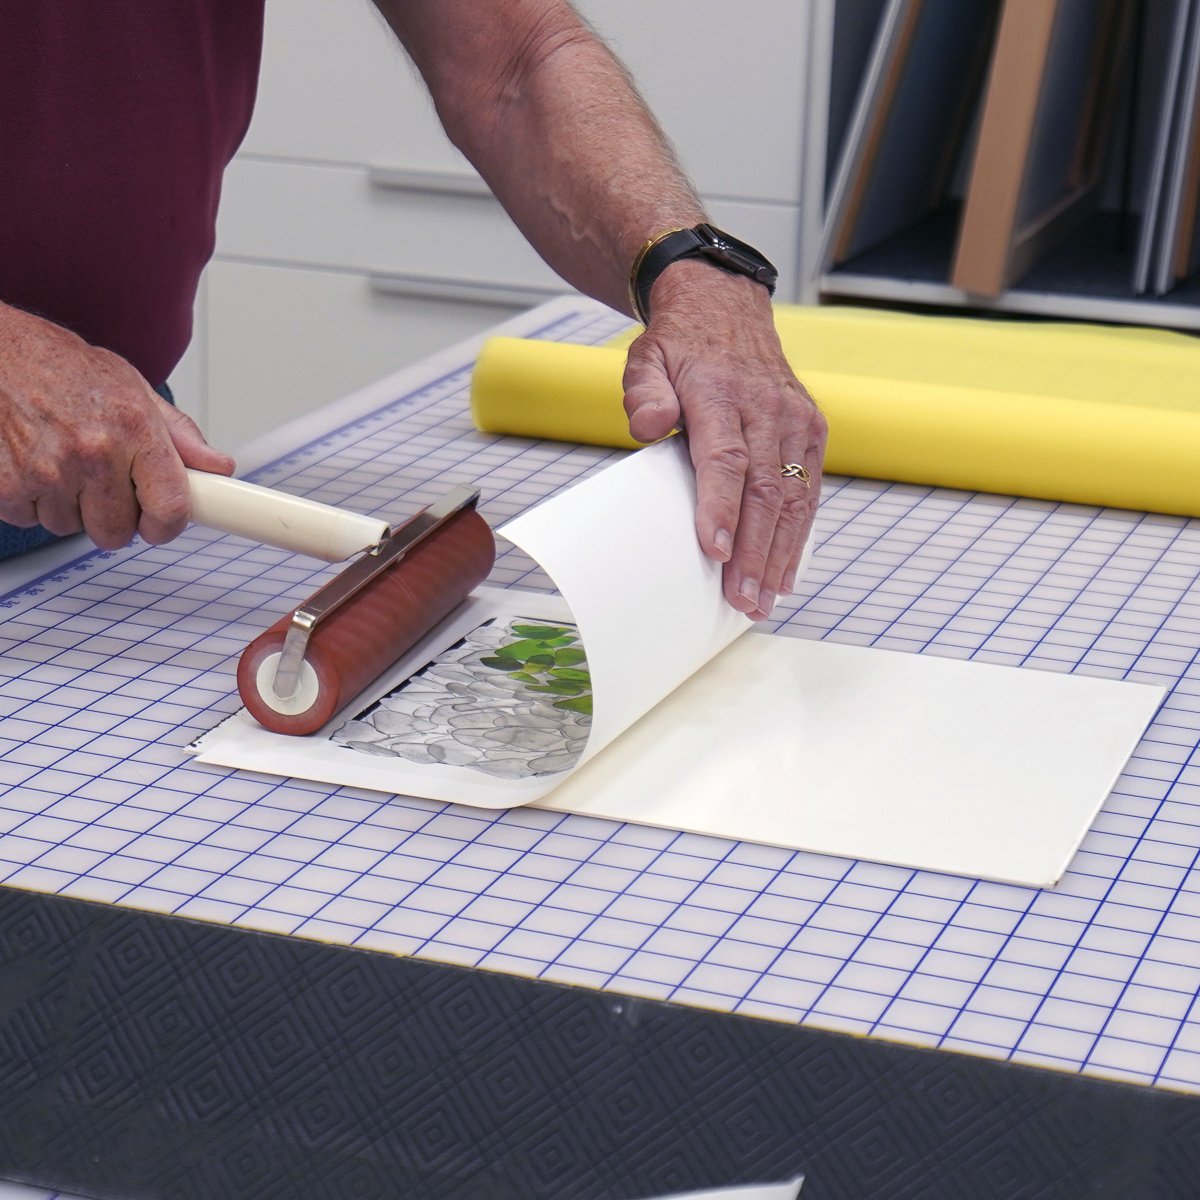  Then the print gets firmly rolled onto the adhesive with the brayer. Note how the print is kept curved as it’s pressed down. This way any unevenness in the print will be straightened. The main thing is to be sure the print is fully adhered with no a